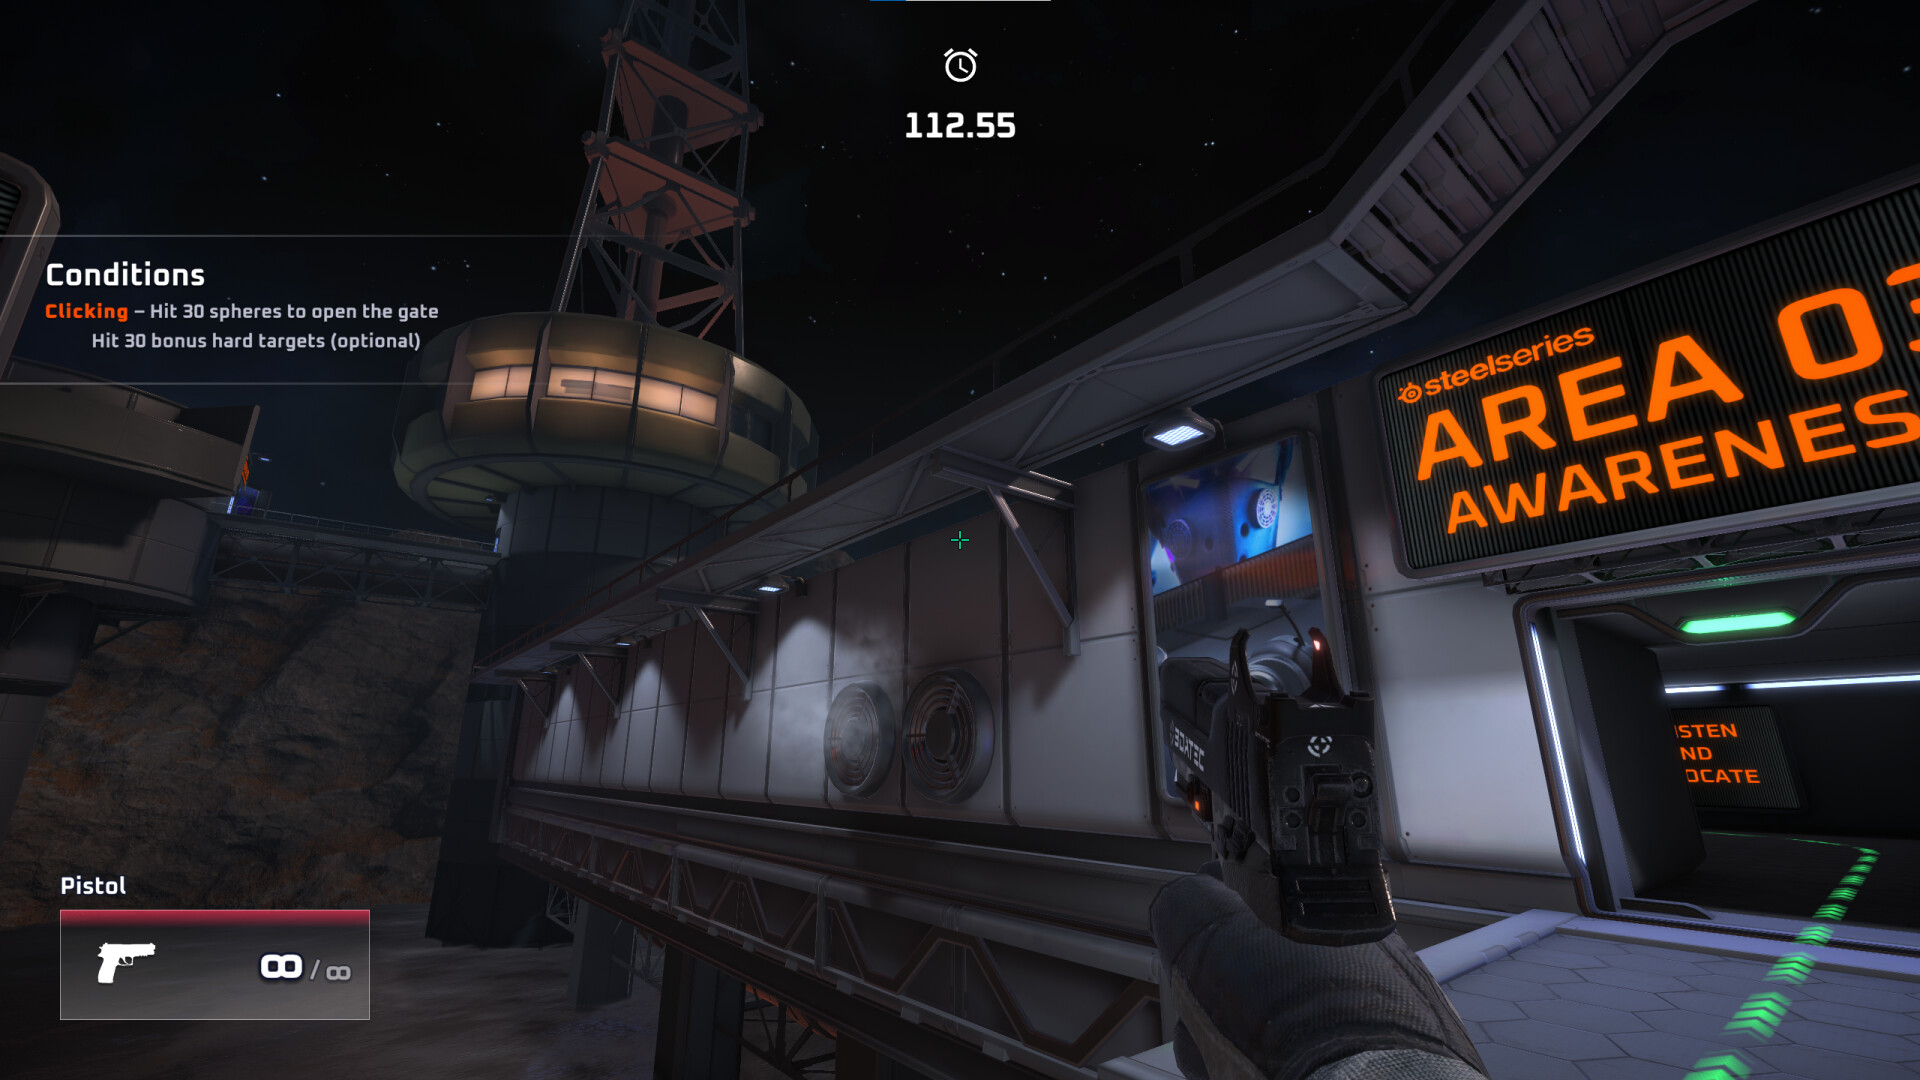 3D Aim Trainer: Best Game to Test & Practice your FPS Aim - 3D Aim